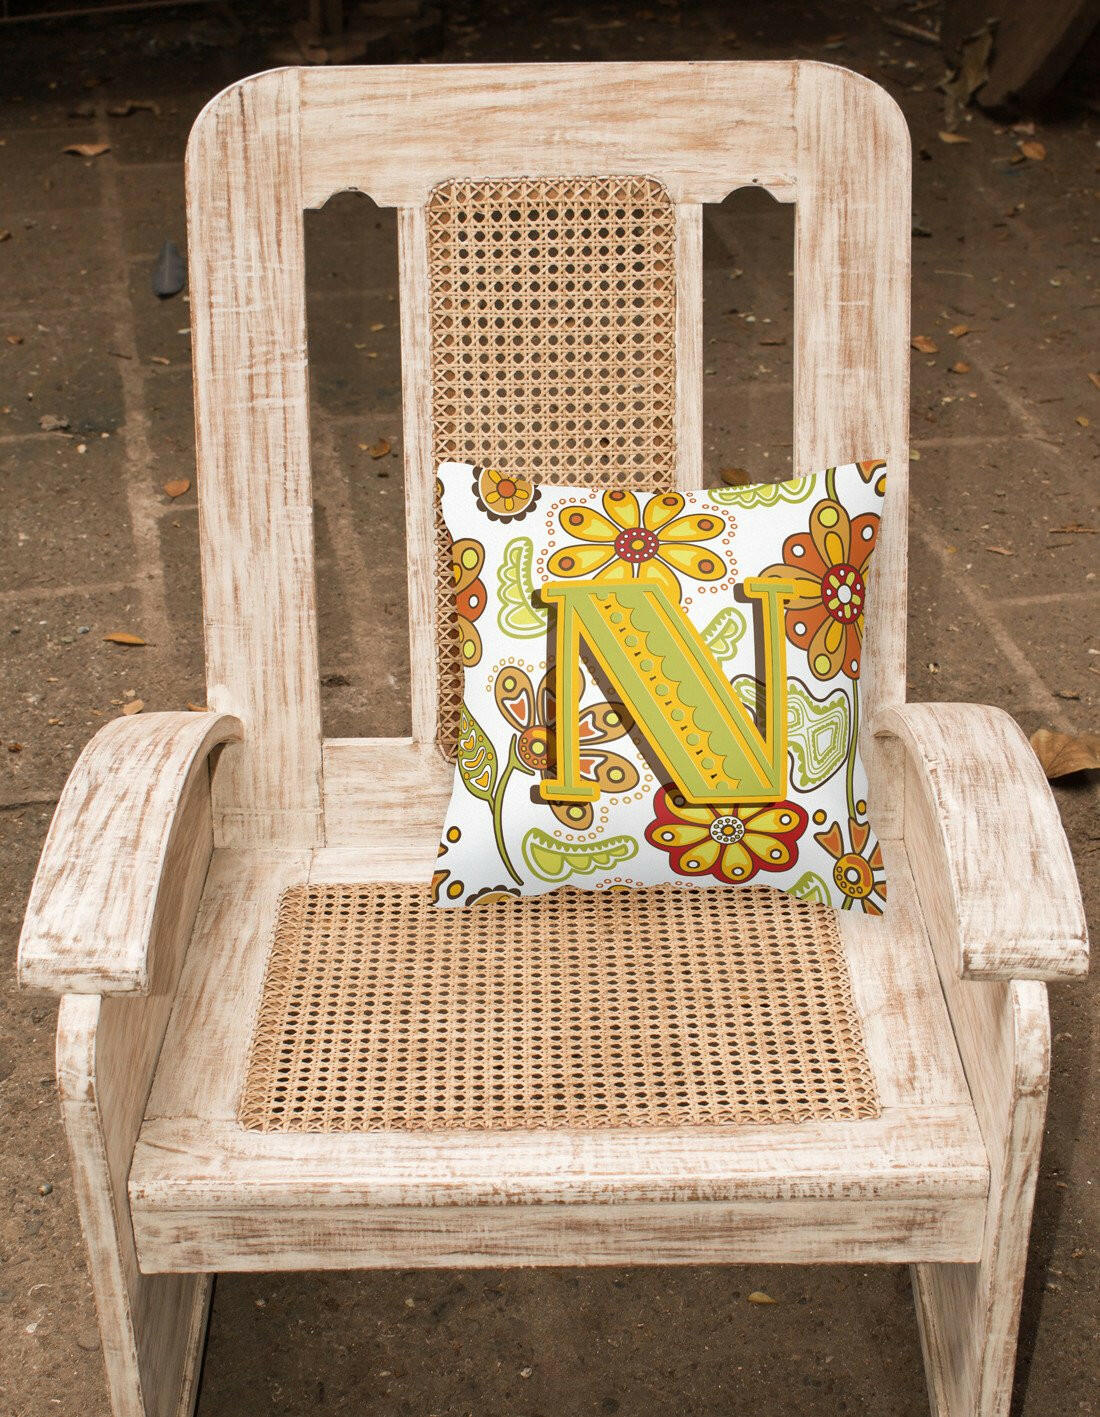 Letter N Floral Mustard and Green Canvas Fabric Decorative Pillow CJ2003-NPW1414 by Caroline's Treasures